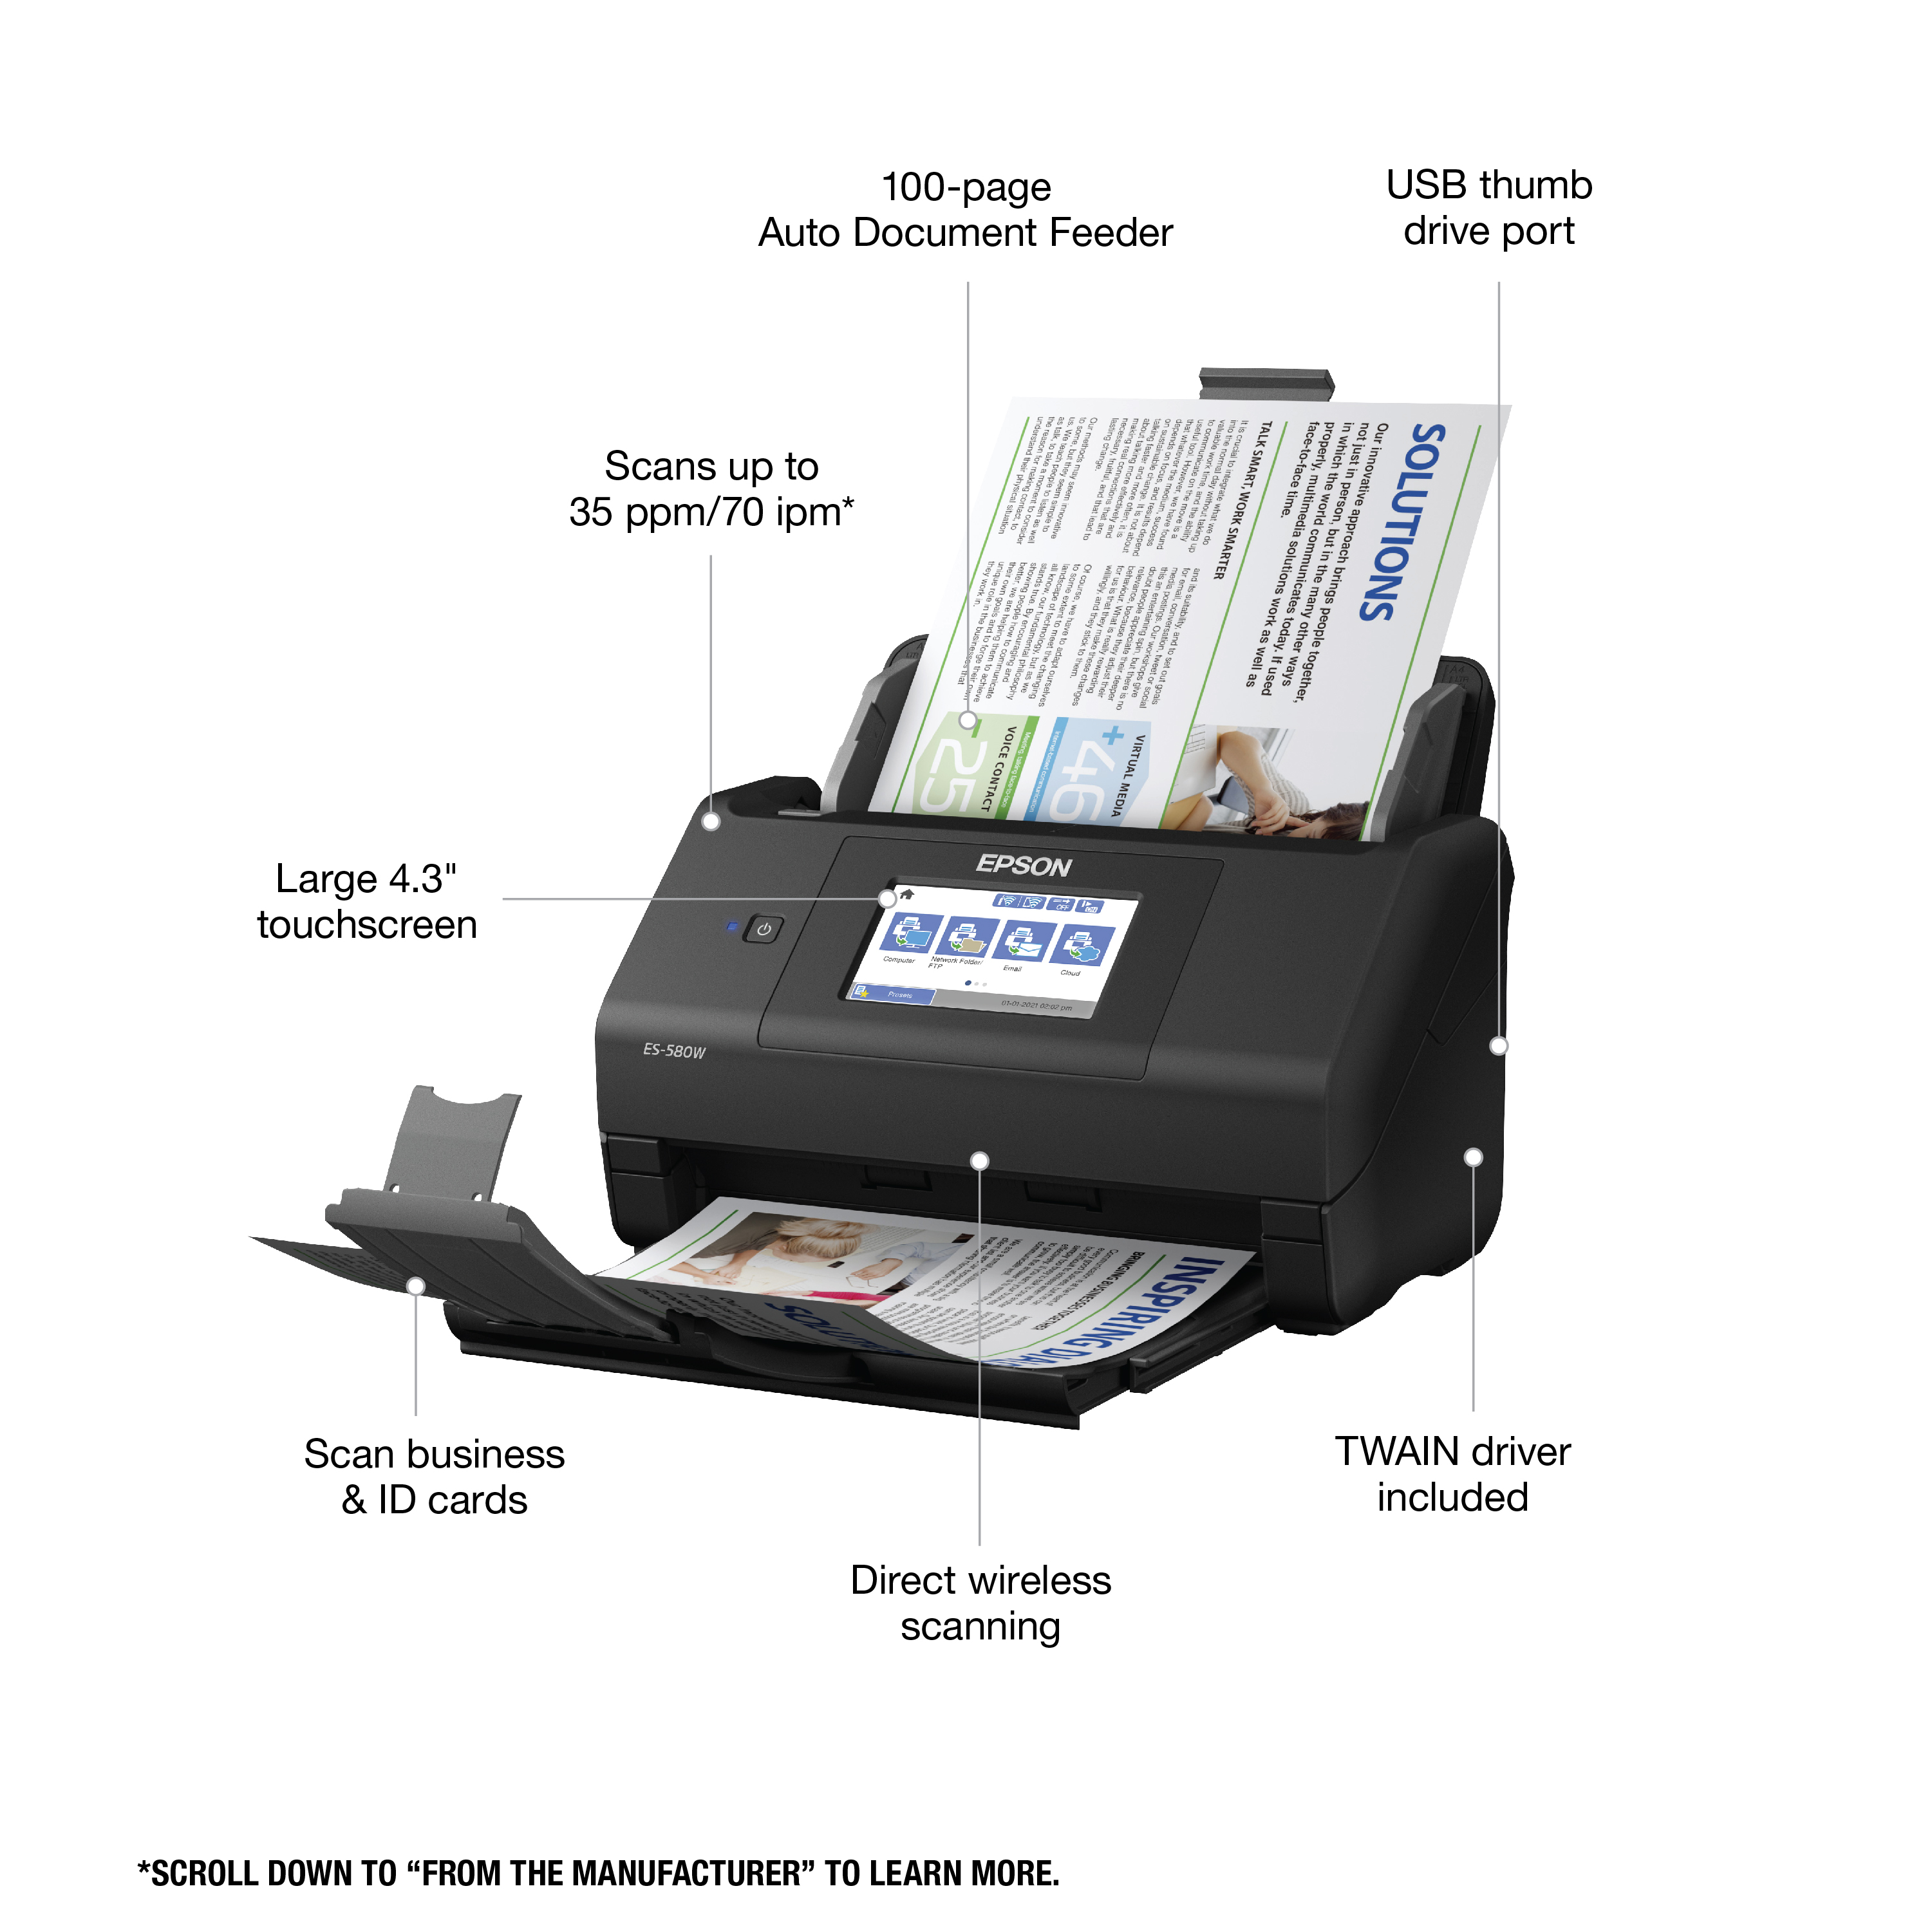 Epson WorkForce ES-580W Wireless Color Duplex Desktop Document Scanner for PC and Mac with 100-sheet Auto Document Feeder (ADF) and Intuitive 4.3" Touchscreen - image 3 of 8